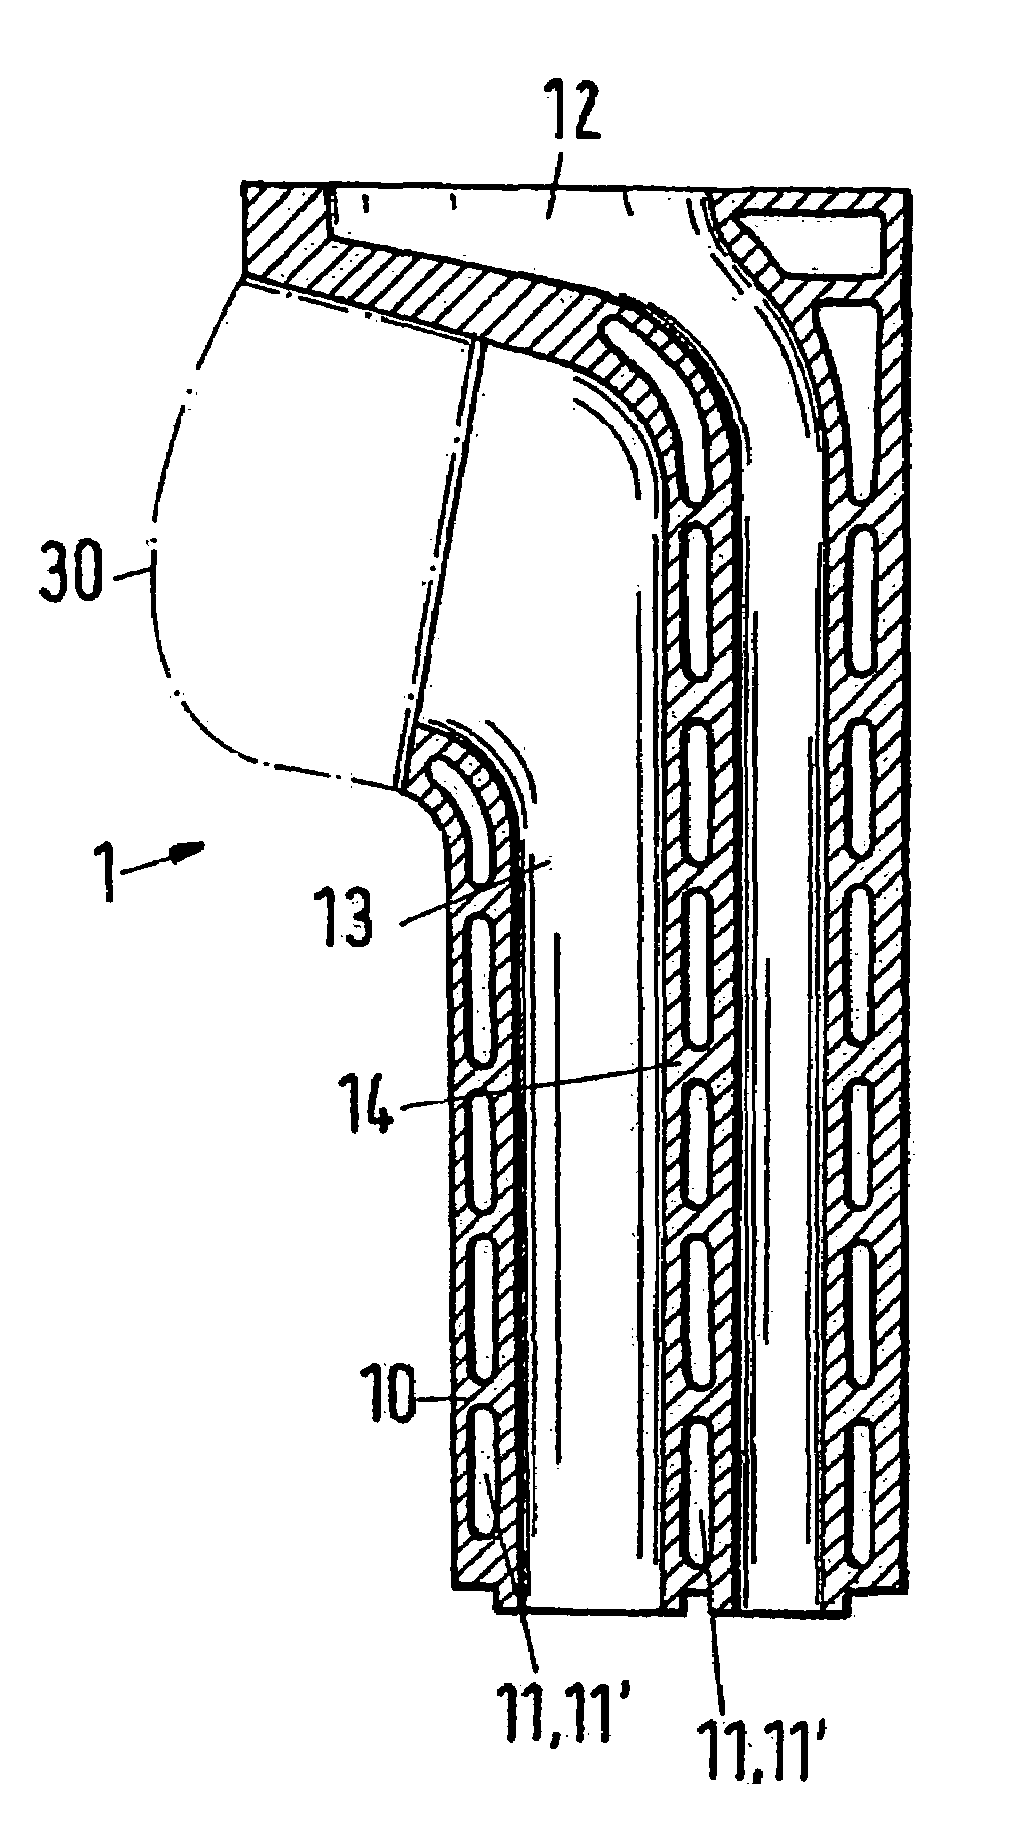 Heat exchanger for a heating system with integrated fuel cells for the production of electricity